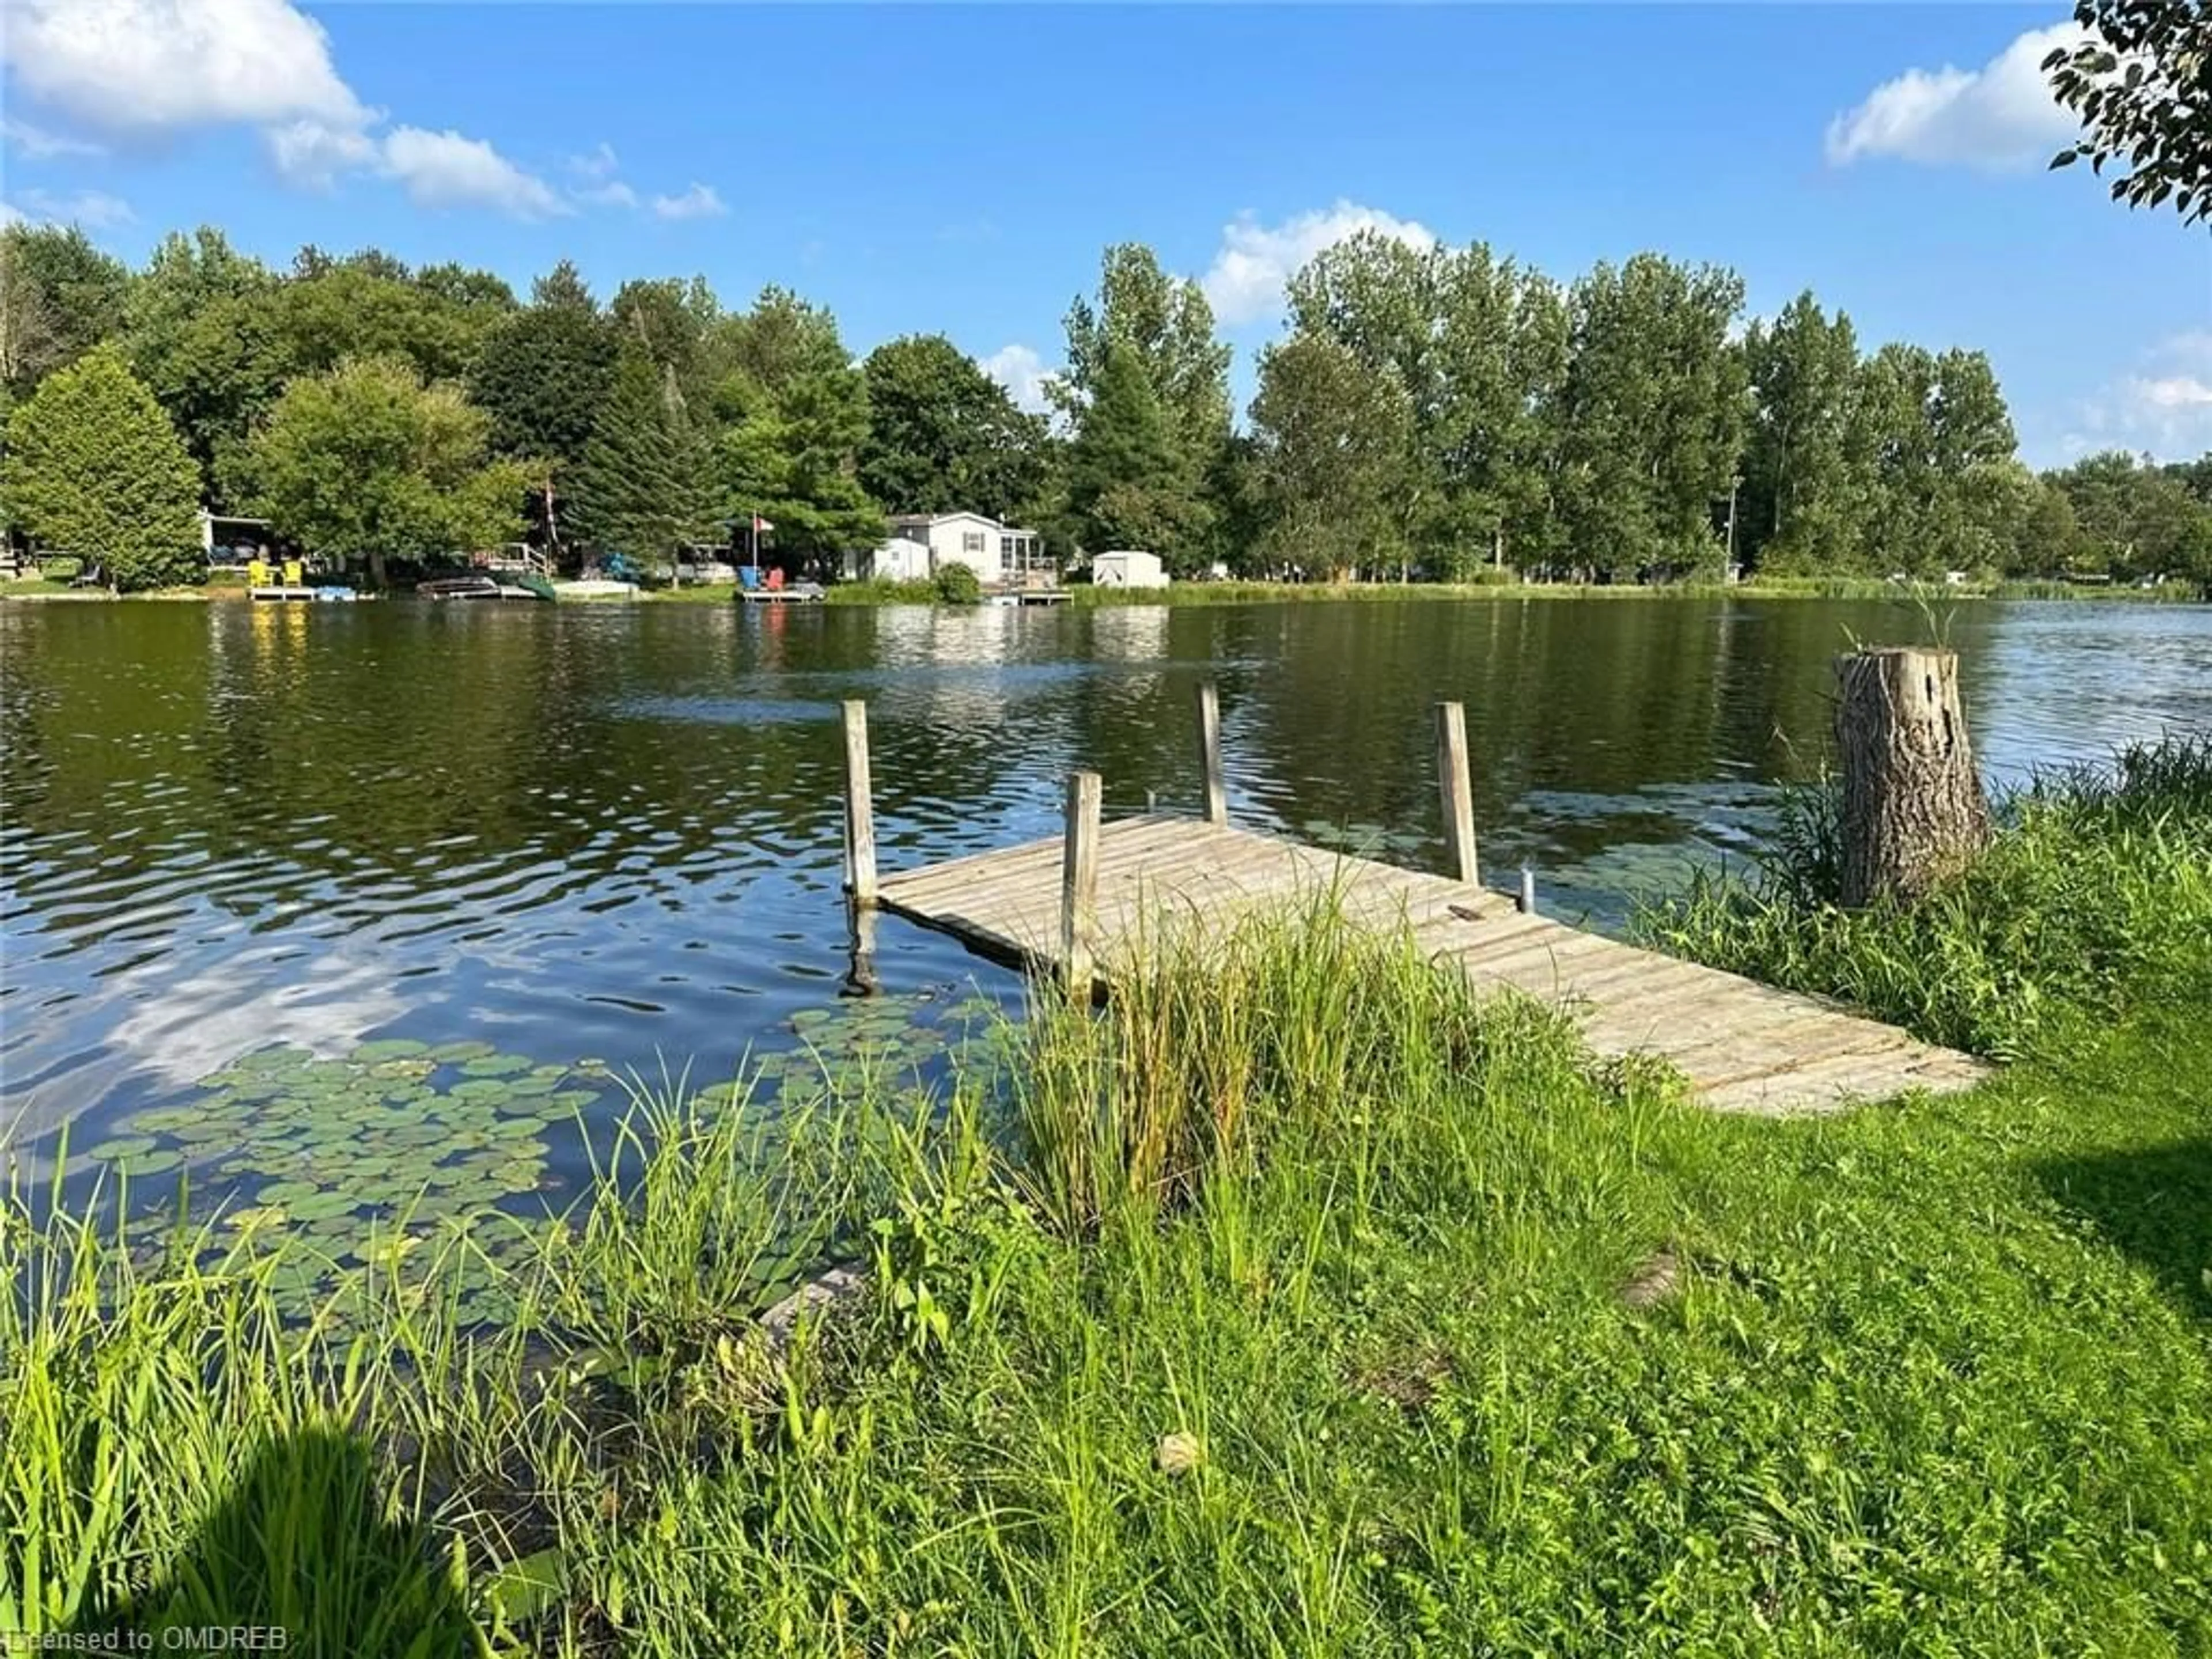 Lakeview for 7489 Sideroad 5 #Bayside 8, Mount Forest Ontario N0G 2L0